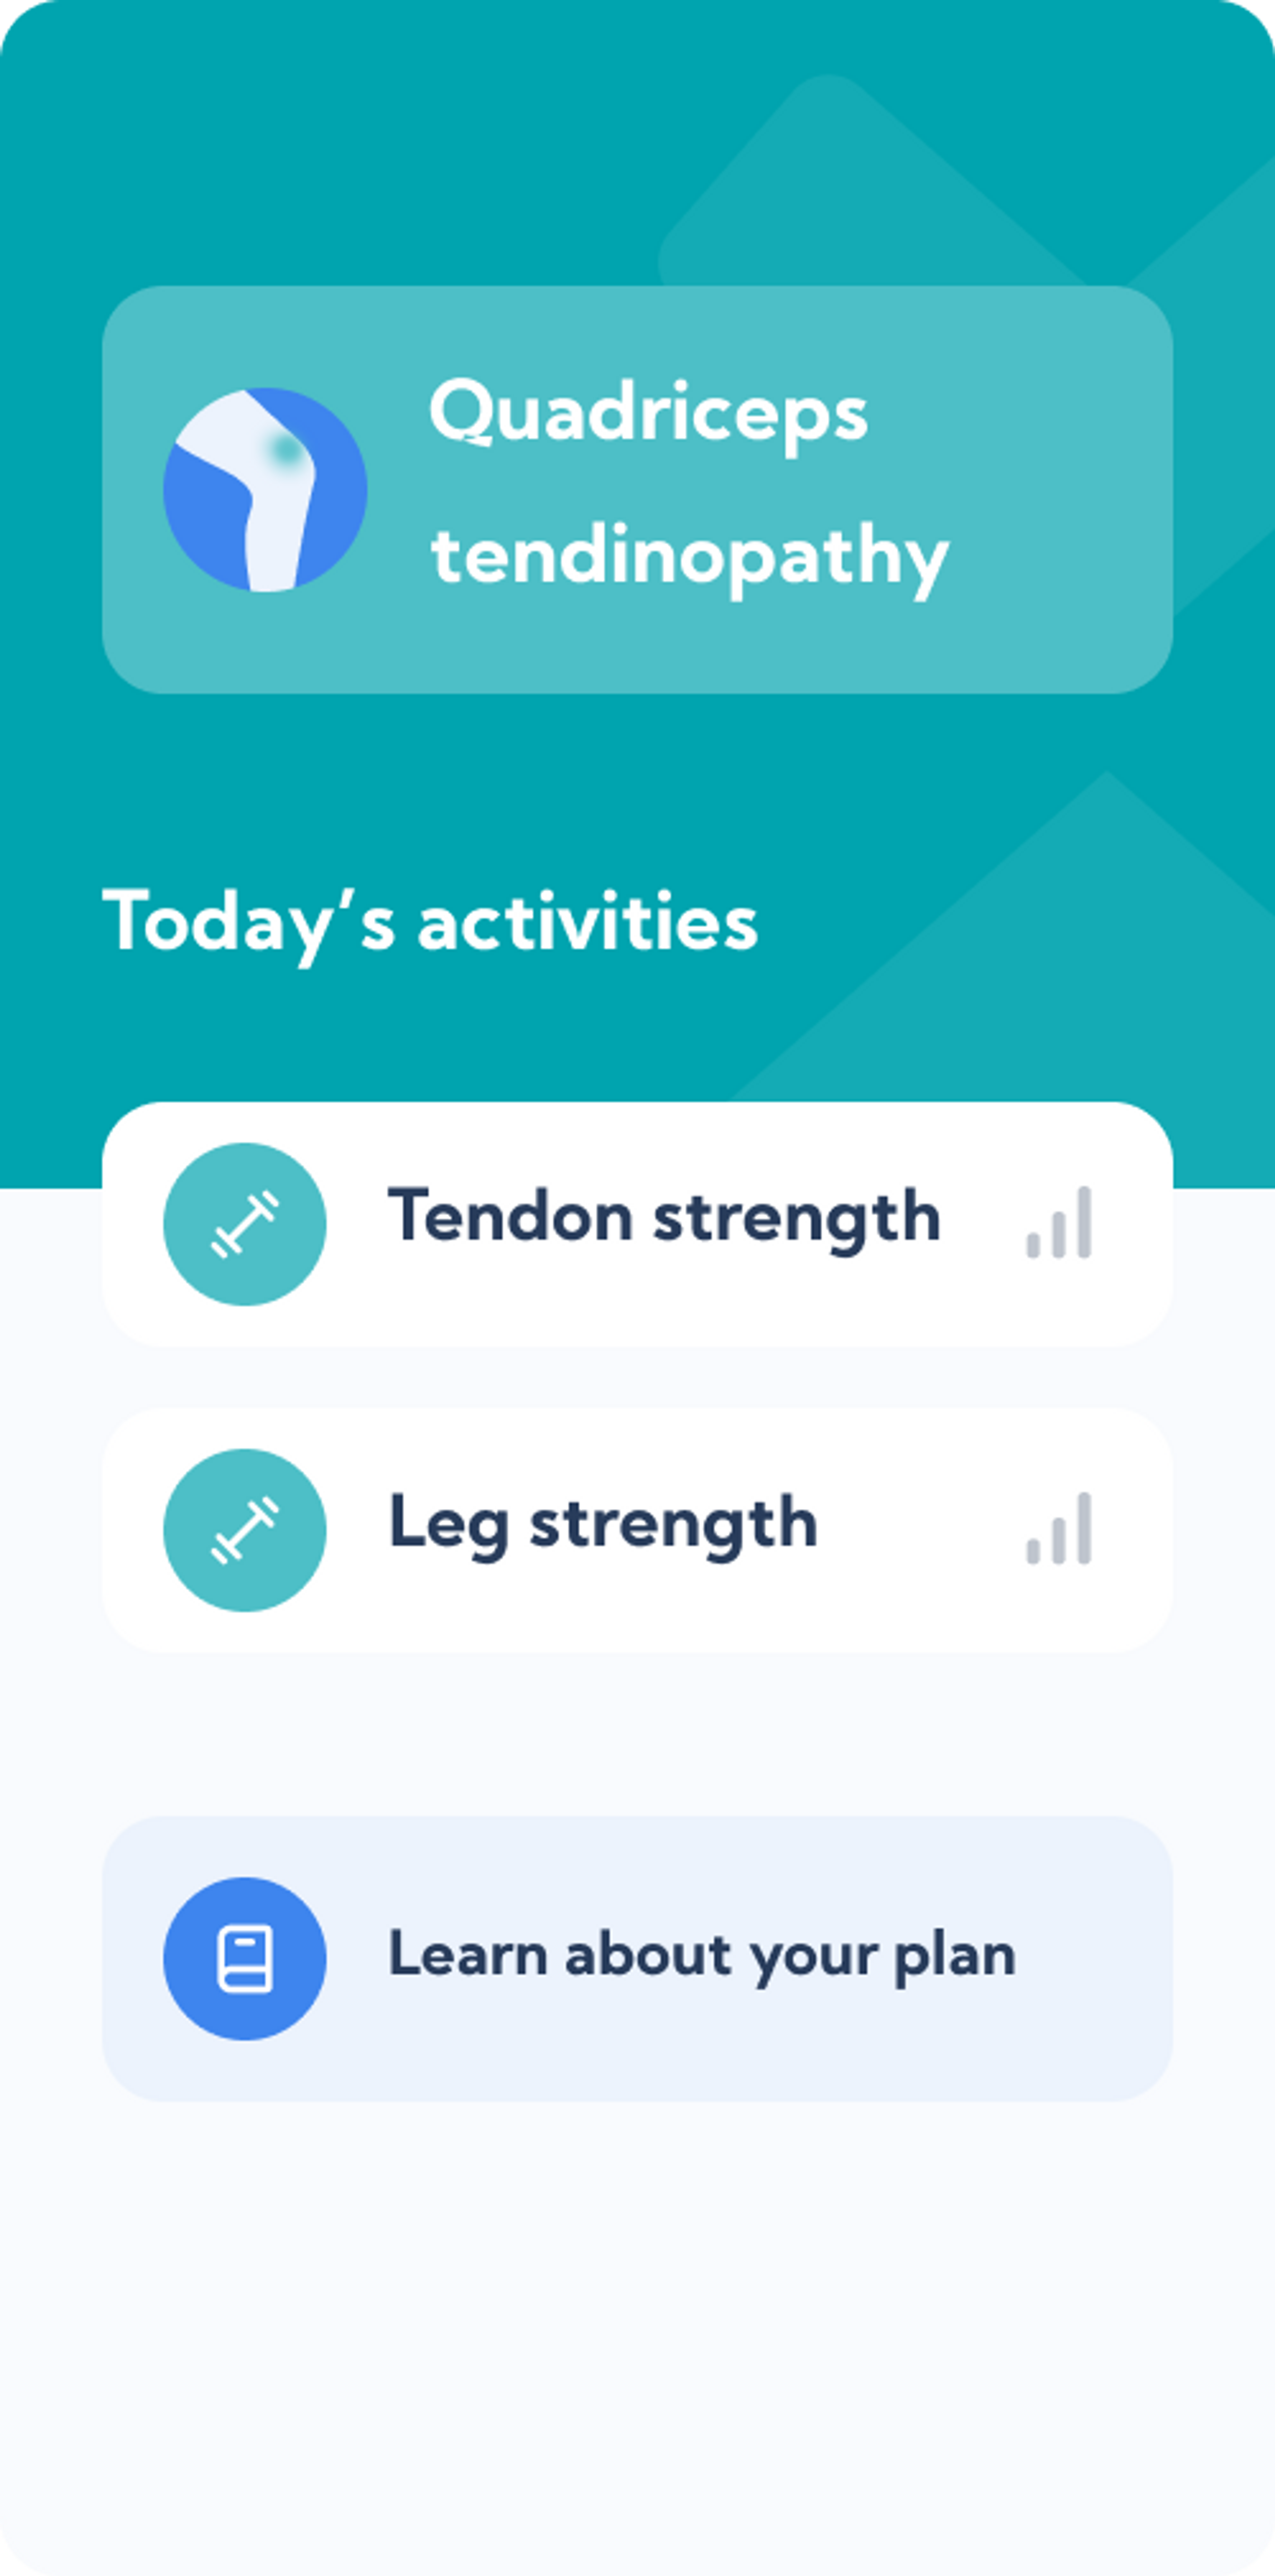 Quadriceps tendinopathy syndrome – Dashboard overview